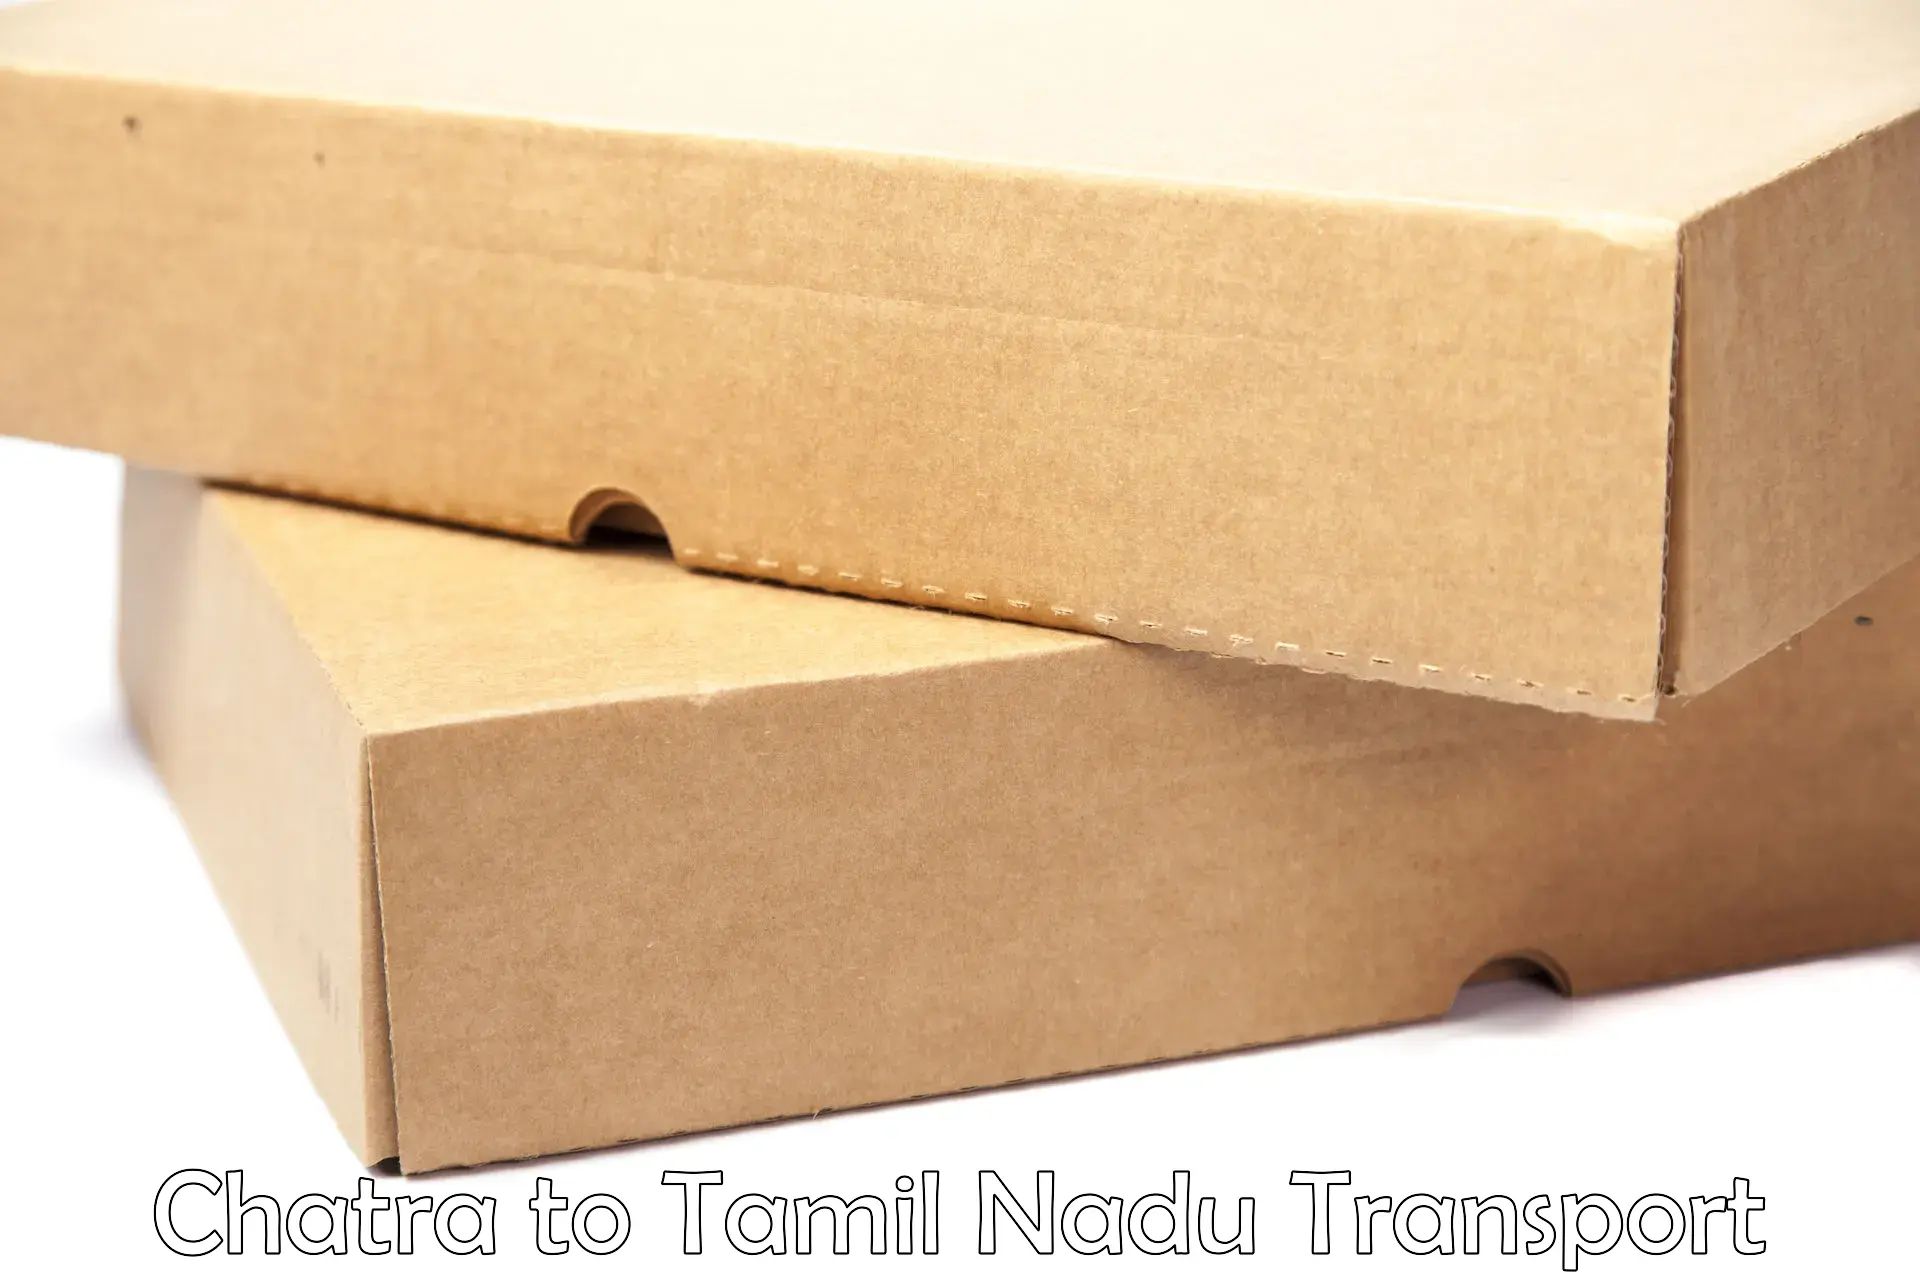 Cycle transportation service Chatra to Trichy